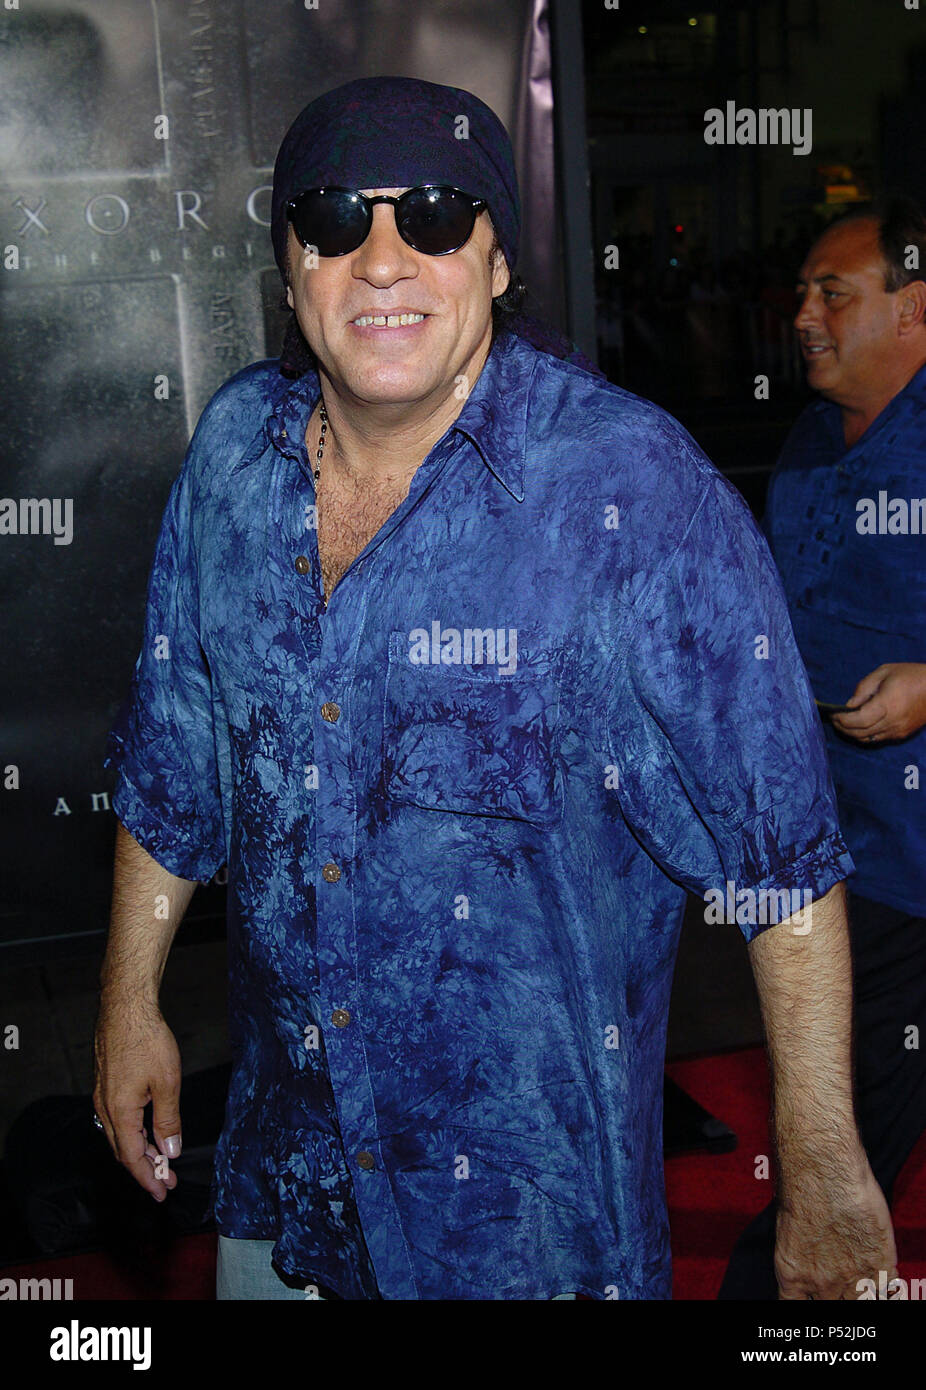 Little Steven Van Zandt arriving at the Exorcist Premiere at the Chinese Theatre in Los Angeles. August 18, 2004. VanZandtLittleSteven024 Red Carpet Event, Vertical, USA, Film Industry, Celebrities,  Photography, Bestof, Arts Culture and Entertainment, Topix Celebrities fashion /  Vertical, Best of, Event in Hollywood Life - California,  Red Carpet and backstage, USA, Film Industry, Celebrities,  movie celebrities, TV celebrities, Music celebrities, Photography, Bestof, Arts Culture and Entertainment,  Topix, vertical, one person,, from the years , 2003 to 2005, inquiry tsuni@Gamma-USA.com - T Stock Photo